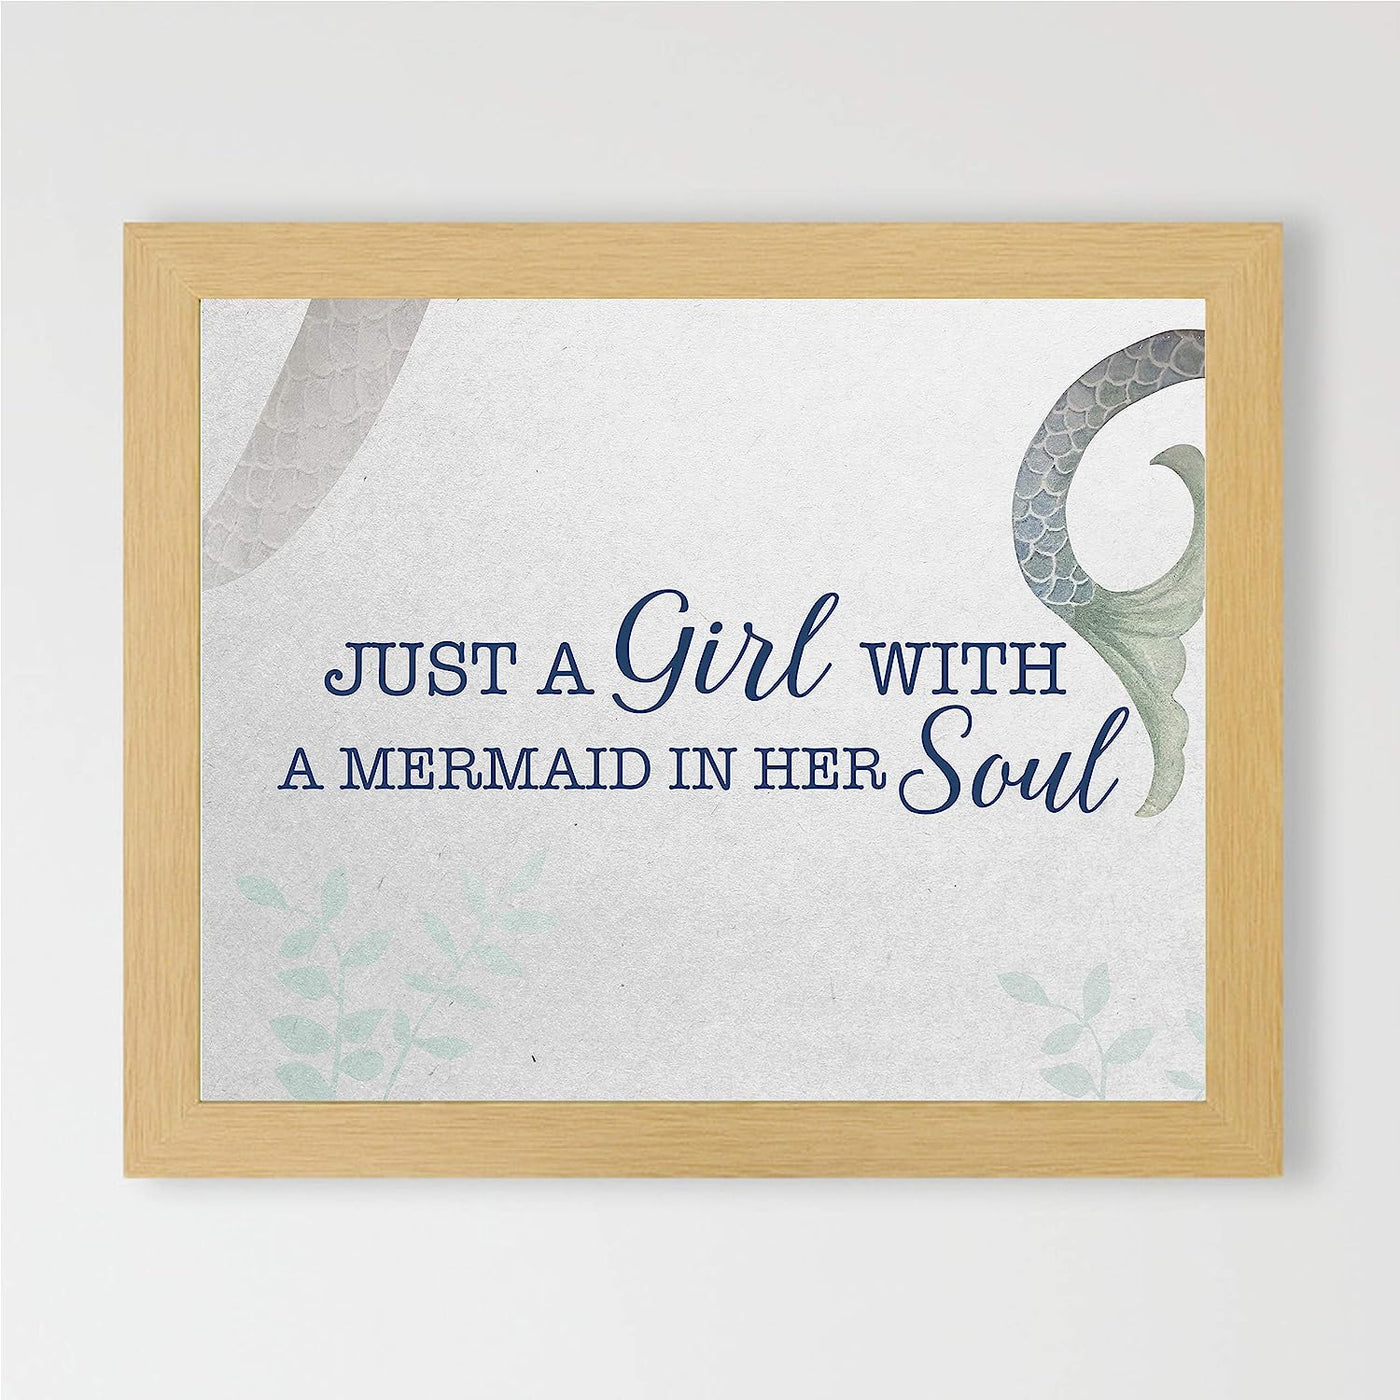 Just A Girl With A Mermaid In Her Soul Fun Beach Themed Sign -10 x 8" Typographic Art Print w/Mermaid Tail Image-Ready to Frame. Home-Girls Bedroom-Ocean Decor. Perfect for the Beach House!